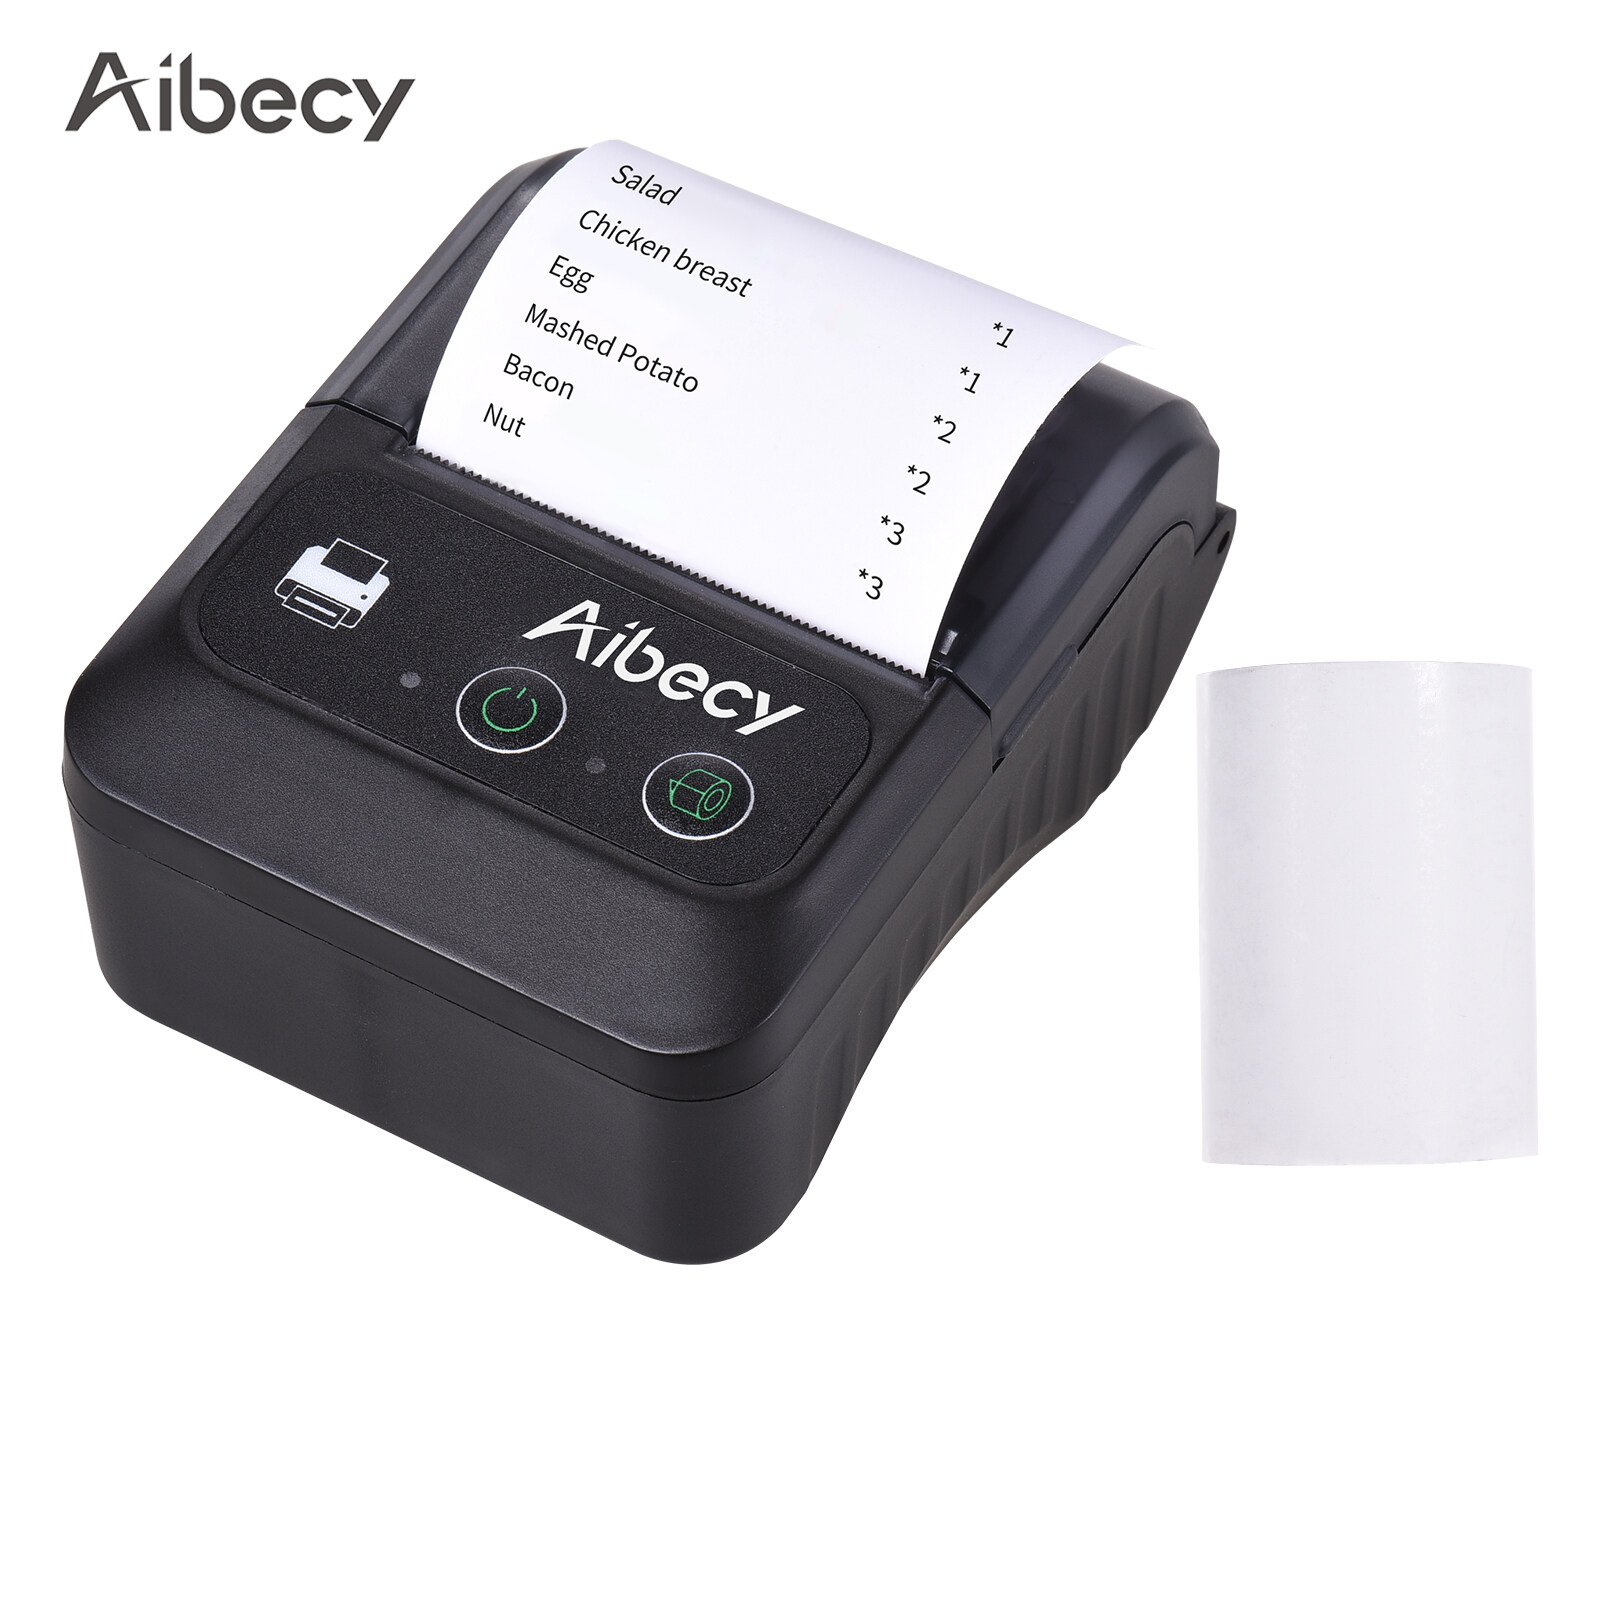 (Free 1 Roll Paper)Aibecy Portable Wireless BT Mini Thermal Printer 58mm 2 Inch Thermal Receipt Printer Command Compatible with Android/Windows...